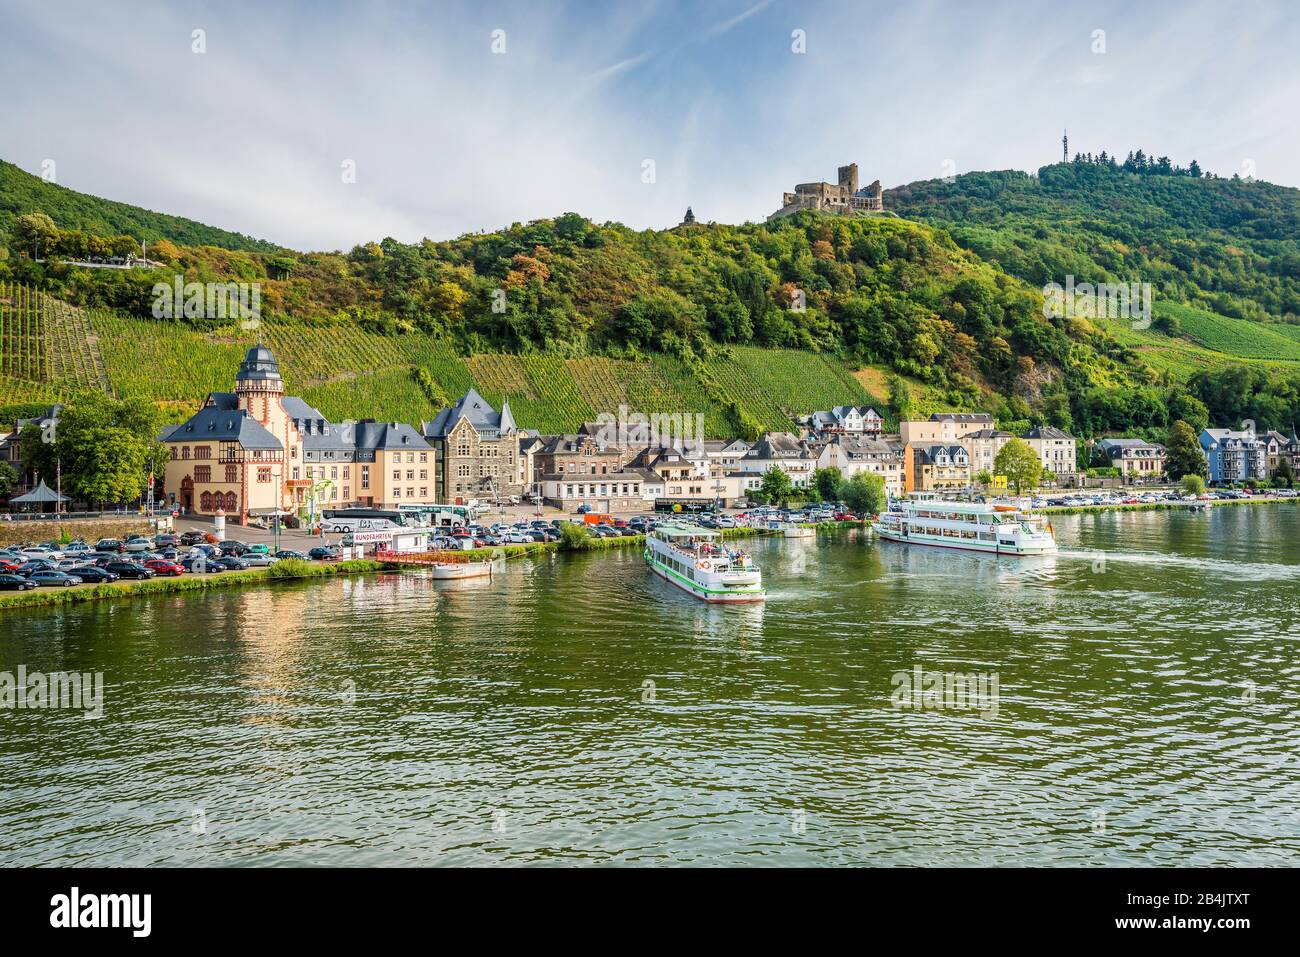 Bernkastel with Burg Landshut, Mittelmosel, popular destination by car and boat, historic market place is worth seeing, Stock Photo